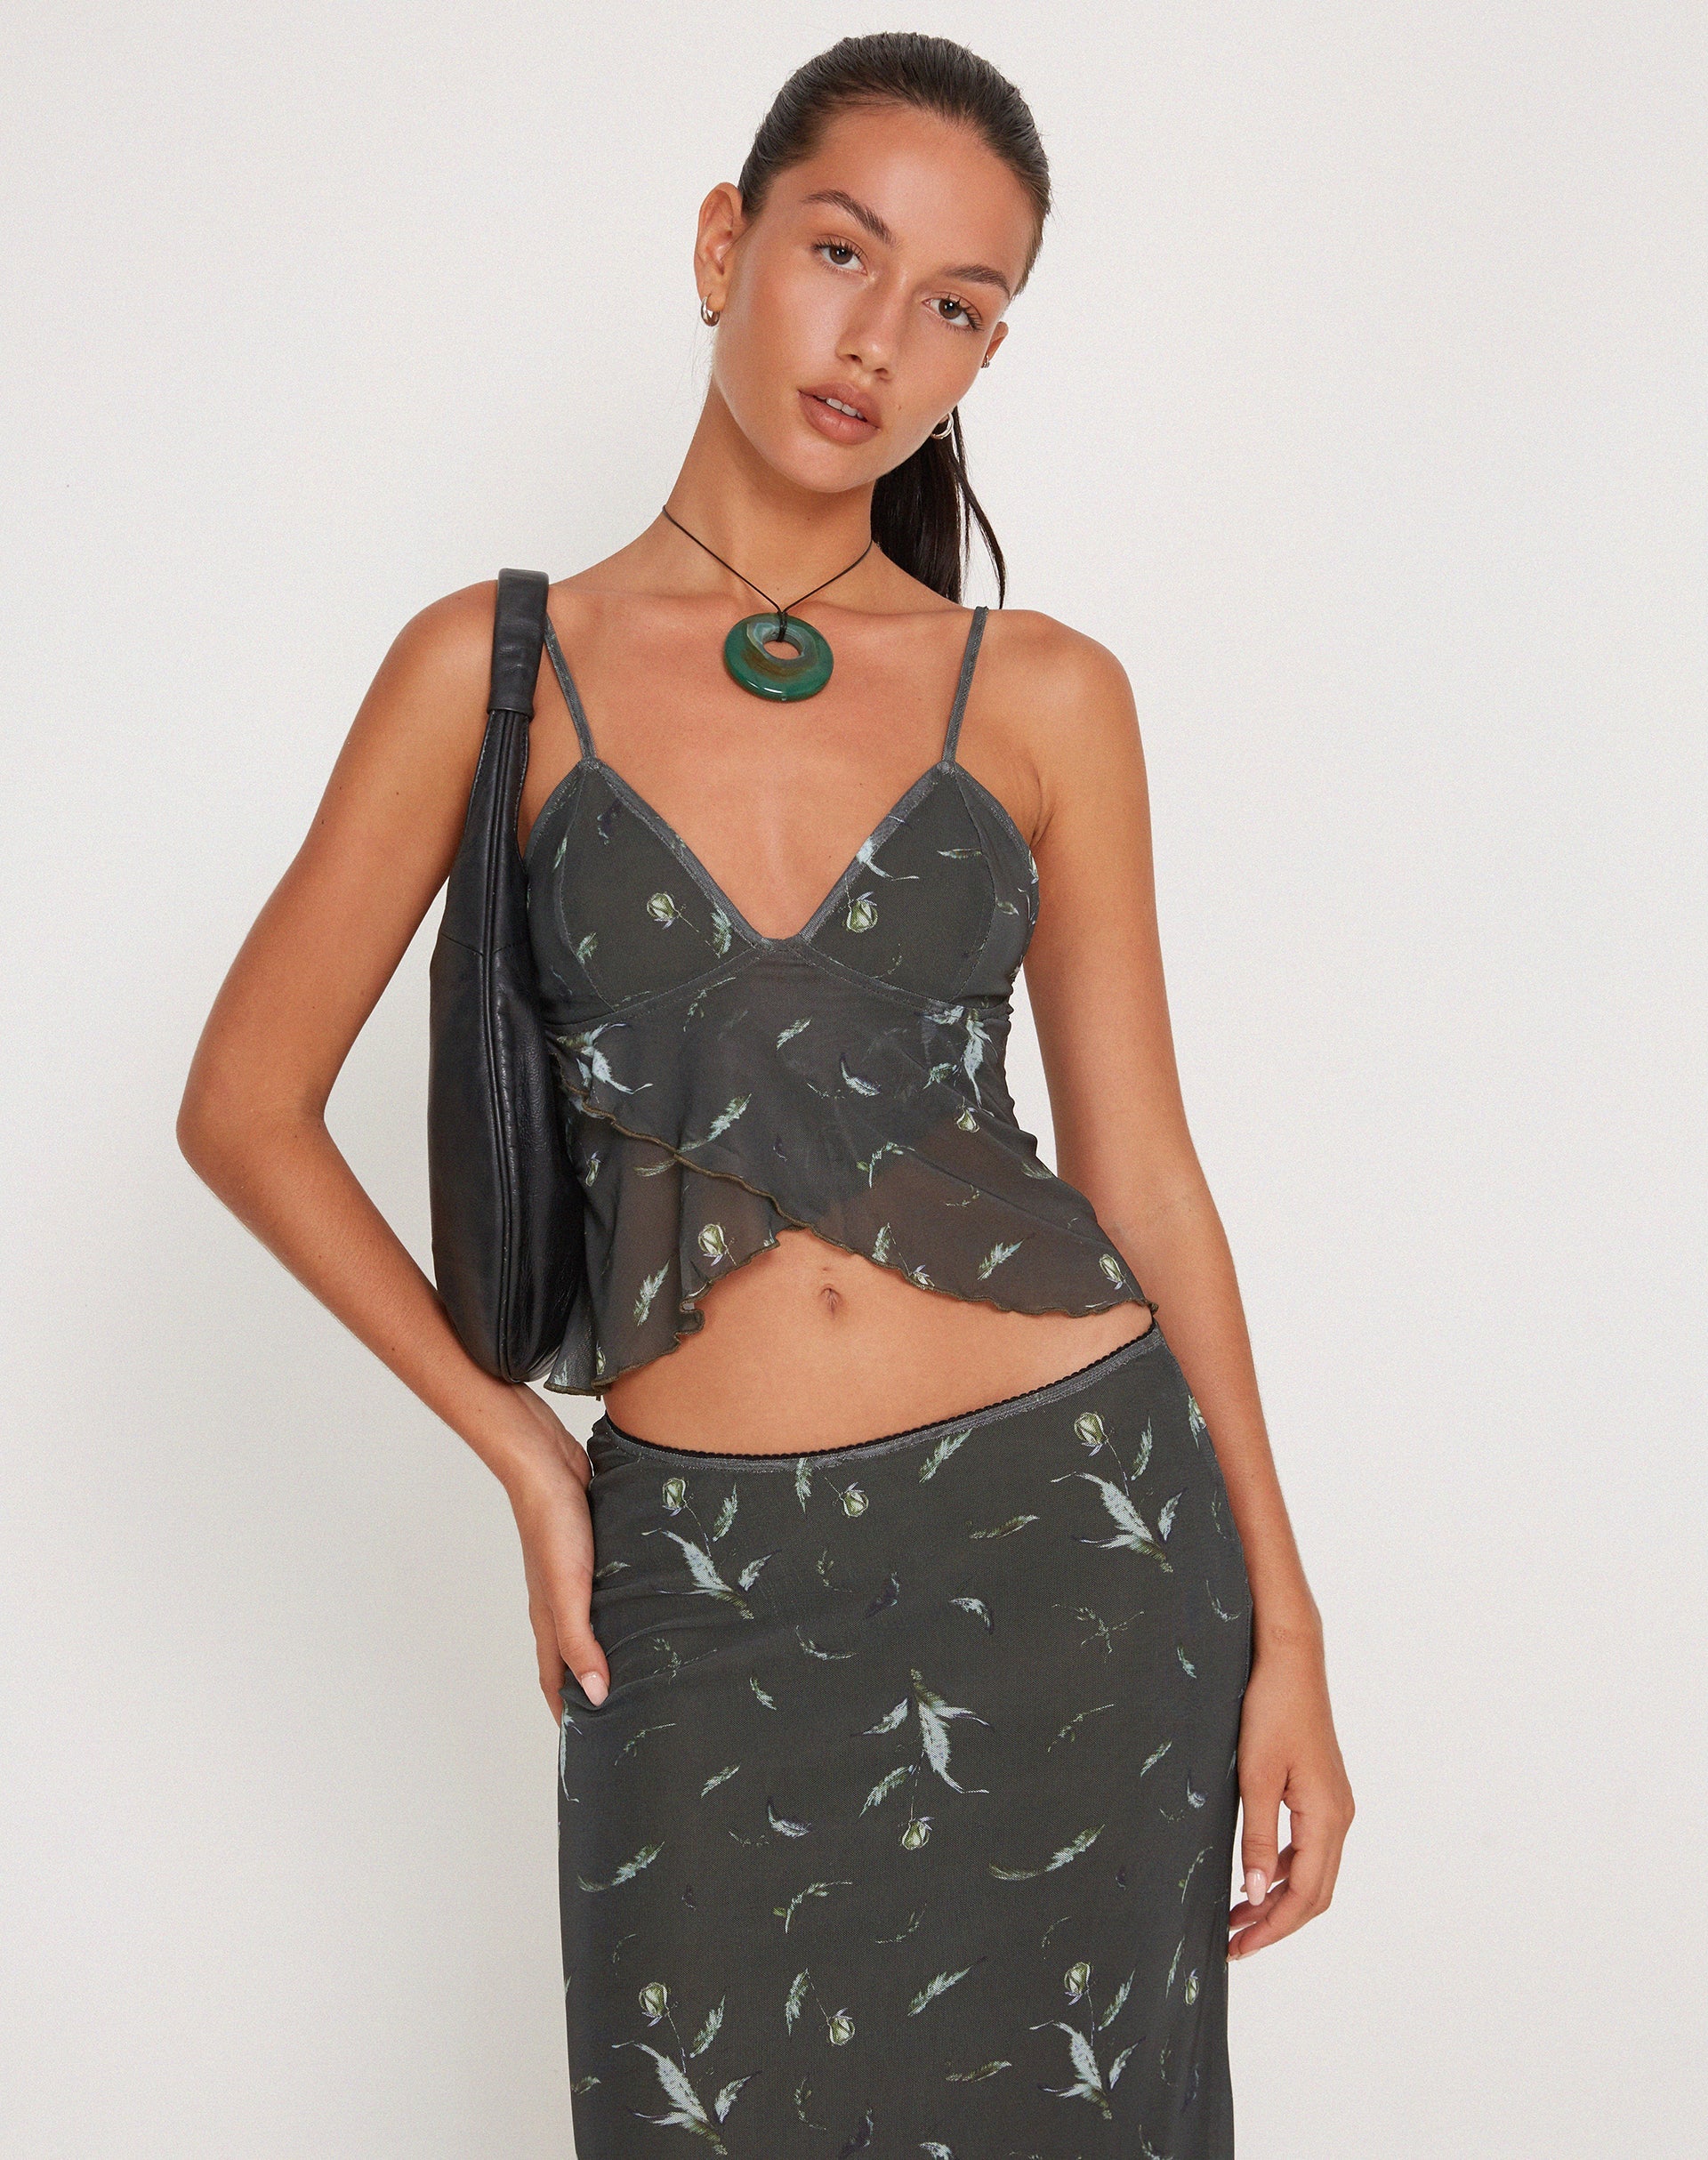 Image of Cojira Mesh Butterfly Top in Floral Khaki Silhouette